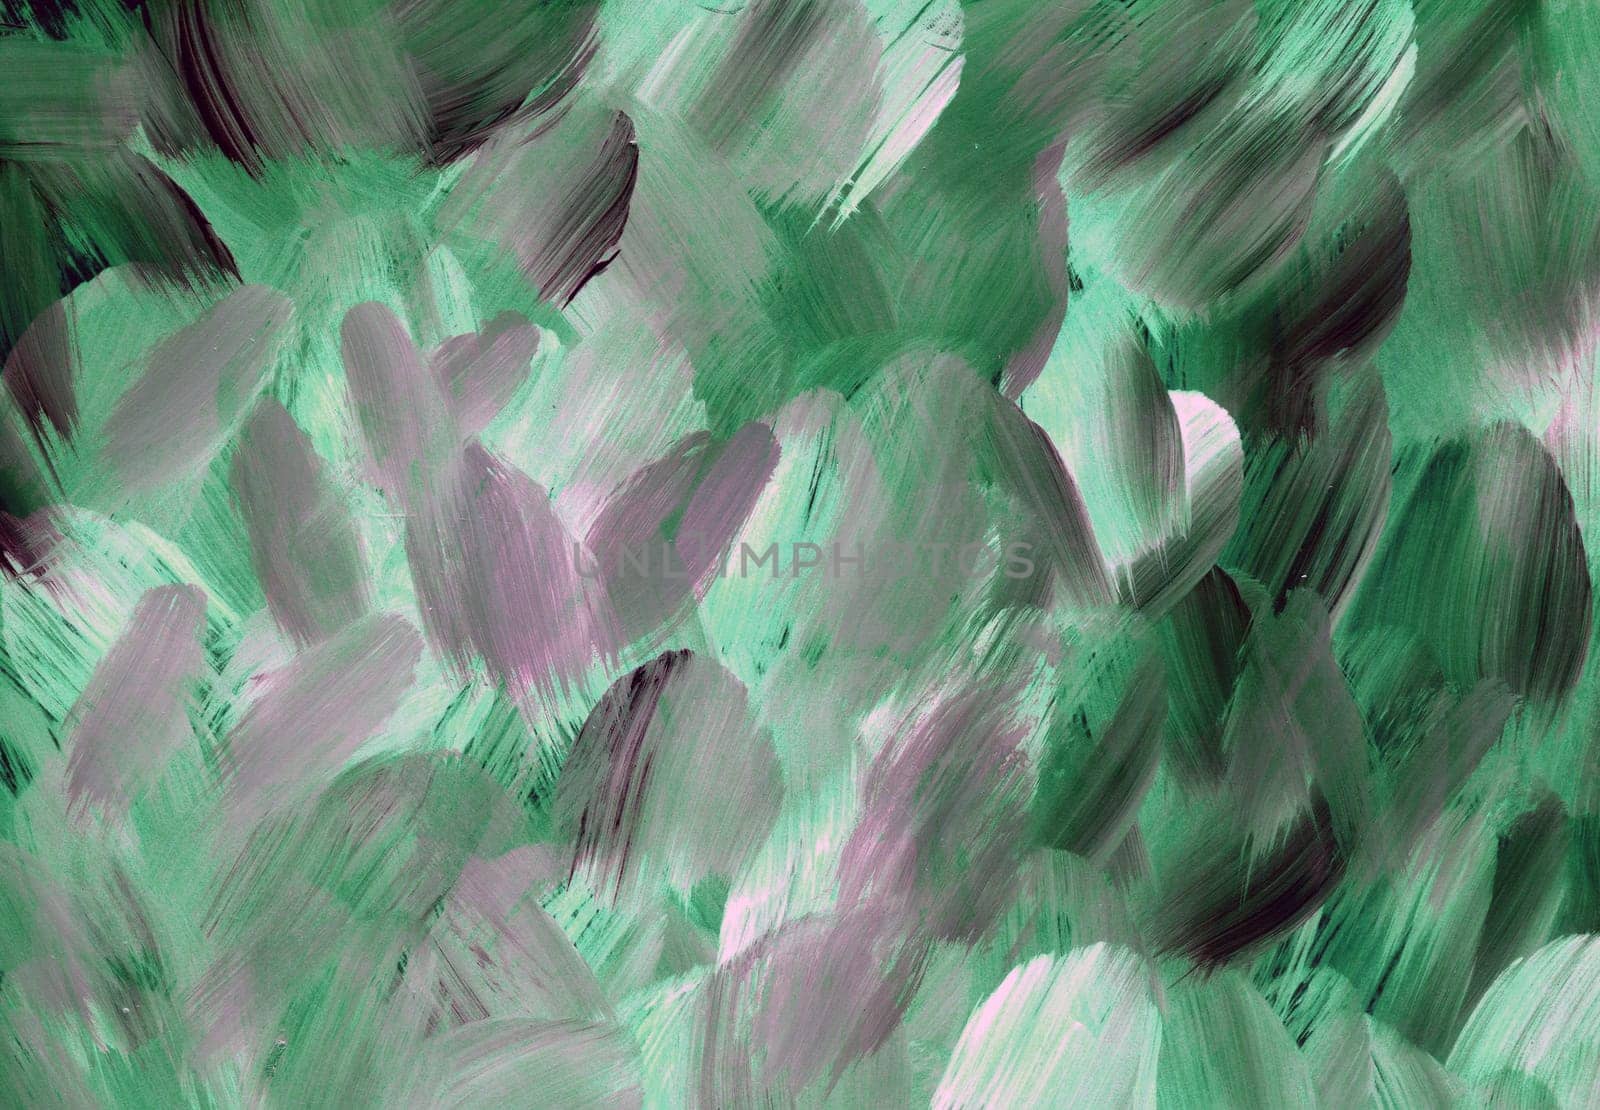 Green blue pink acrylic oil painting texture by Dustick